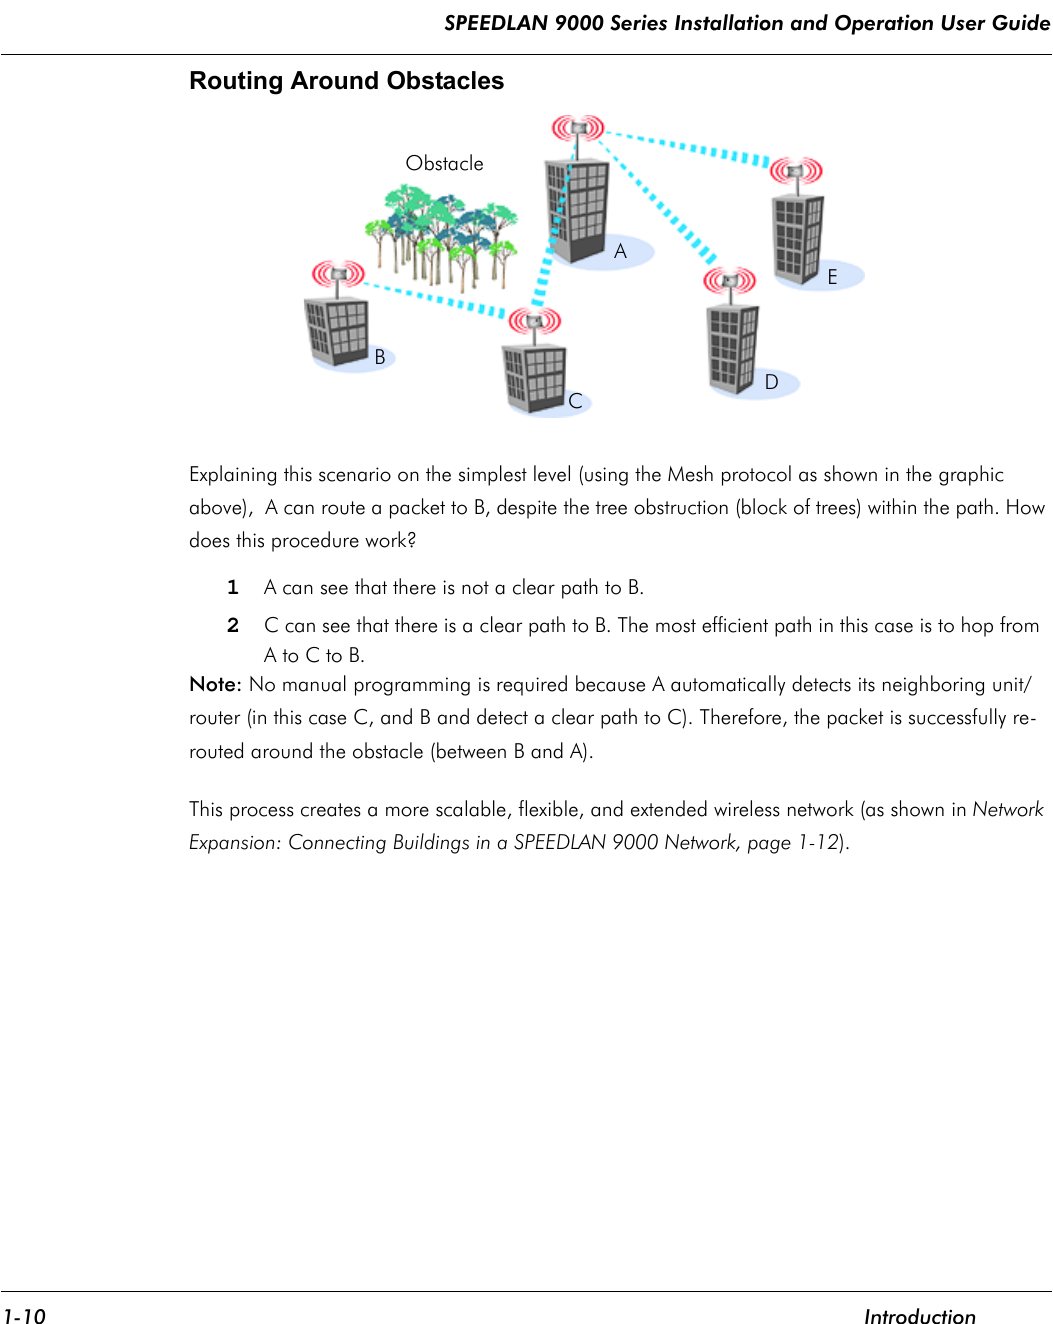 SPEEDLAN 9000 Series Installation and Operation User Guide 1-10 IntroductionRouting Around ObstaclesExplaining this scenario on the simplest level (using the Mesh protocol as shown in the graphic above),  A can route a packet to B, despite the tree obstruction (block of trees) within the path. How does this procedure work?1A can see that there is not a clear path to B.2C can see that there is a clear path to B. The most efficient path in this case is to hop from  A to C to B.Note: No manual programming is required because A automatically detects its neighboring unit/router (in this case C, and B and detect a clear path to C). Therefore, the packet is successfully re-routed around the obstacle (between B and A). This process creates a more scalable, flexible, and extended wireless network (as shown in Network Expansion: Connecting Buildings in a SPEEDLAN 9000 Network, page 1-12).  Obstacle A E B C  D